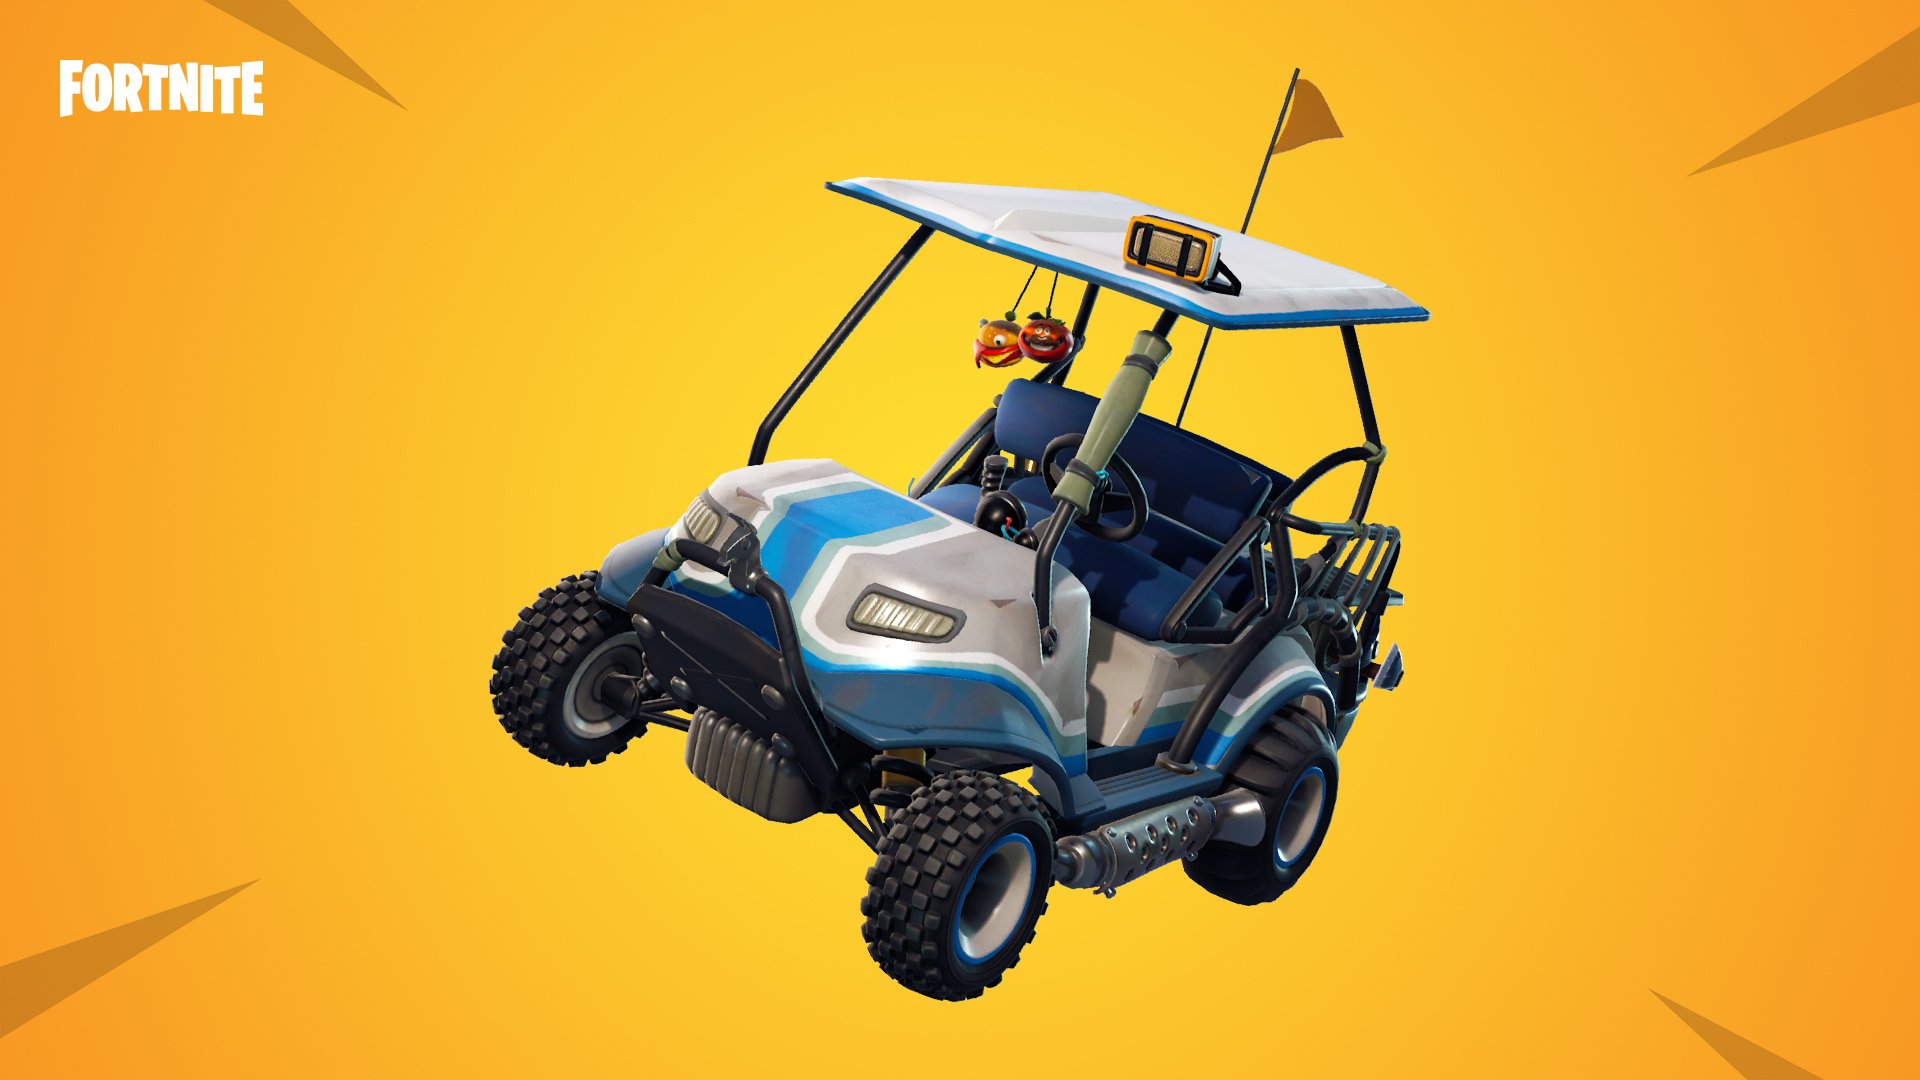 Fortnite Vaulting Planes All Terrain Kart X 4 Stormwing Planes And Other Items Were Vaulted In Fortnite Season 8 Dot Esports